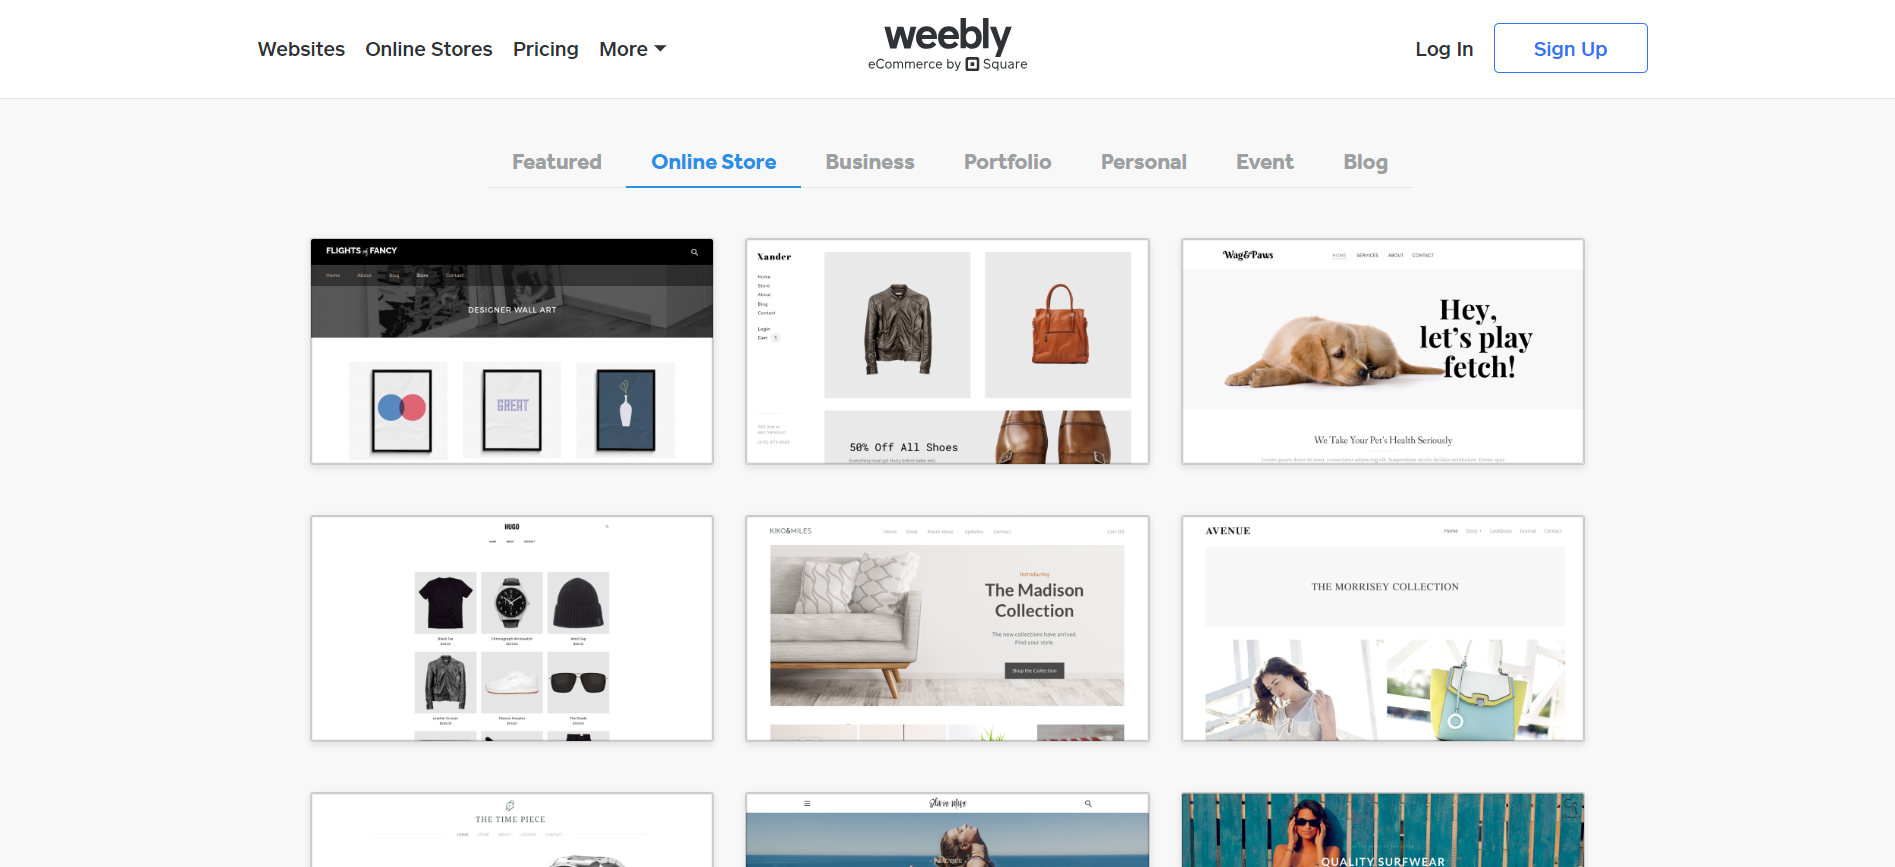 Templat Weebly